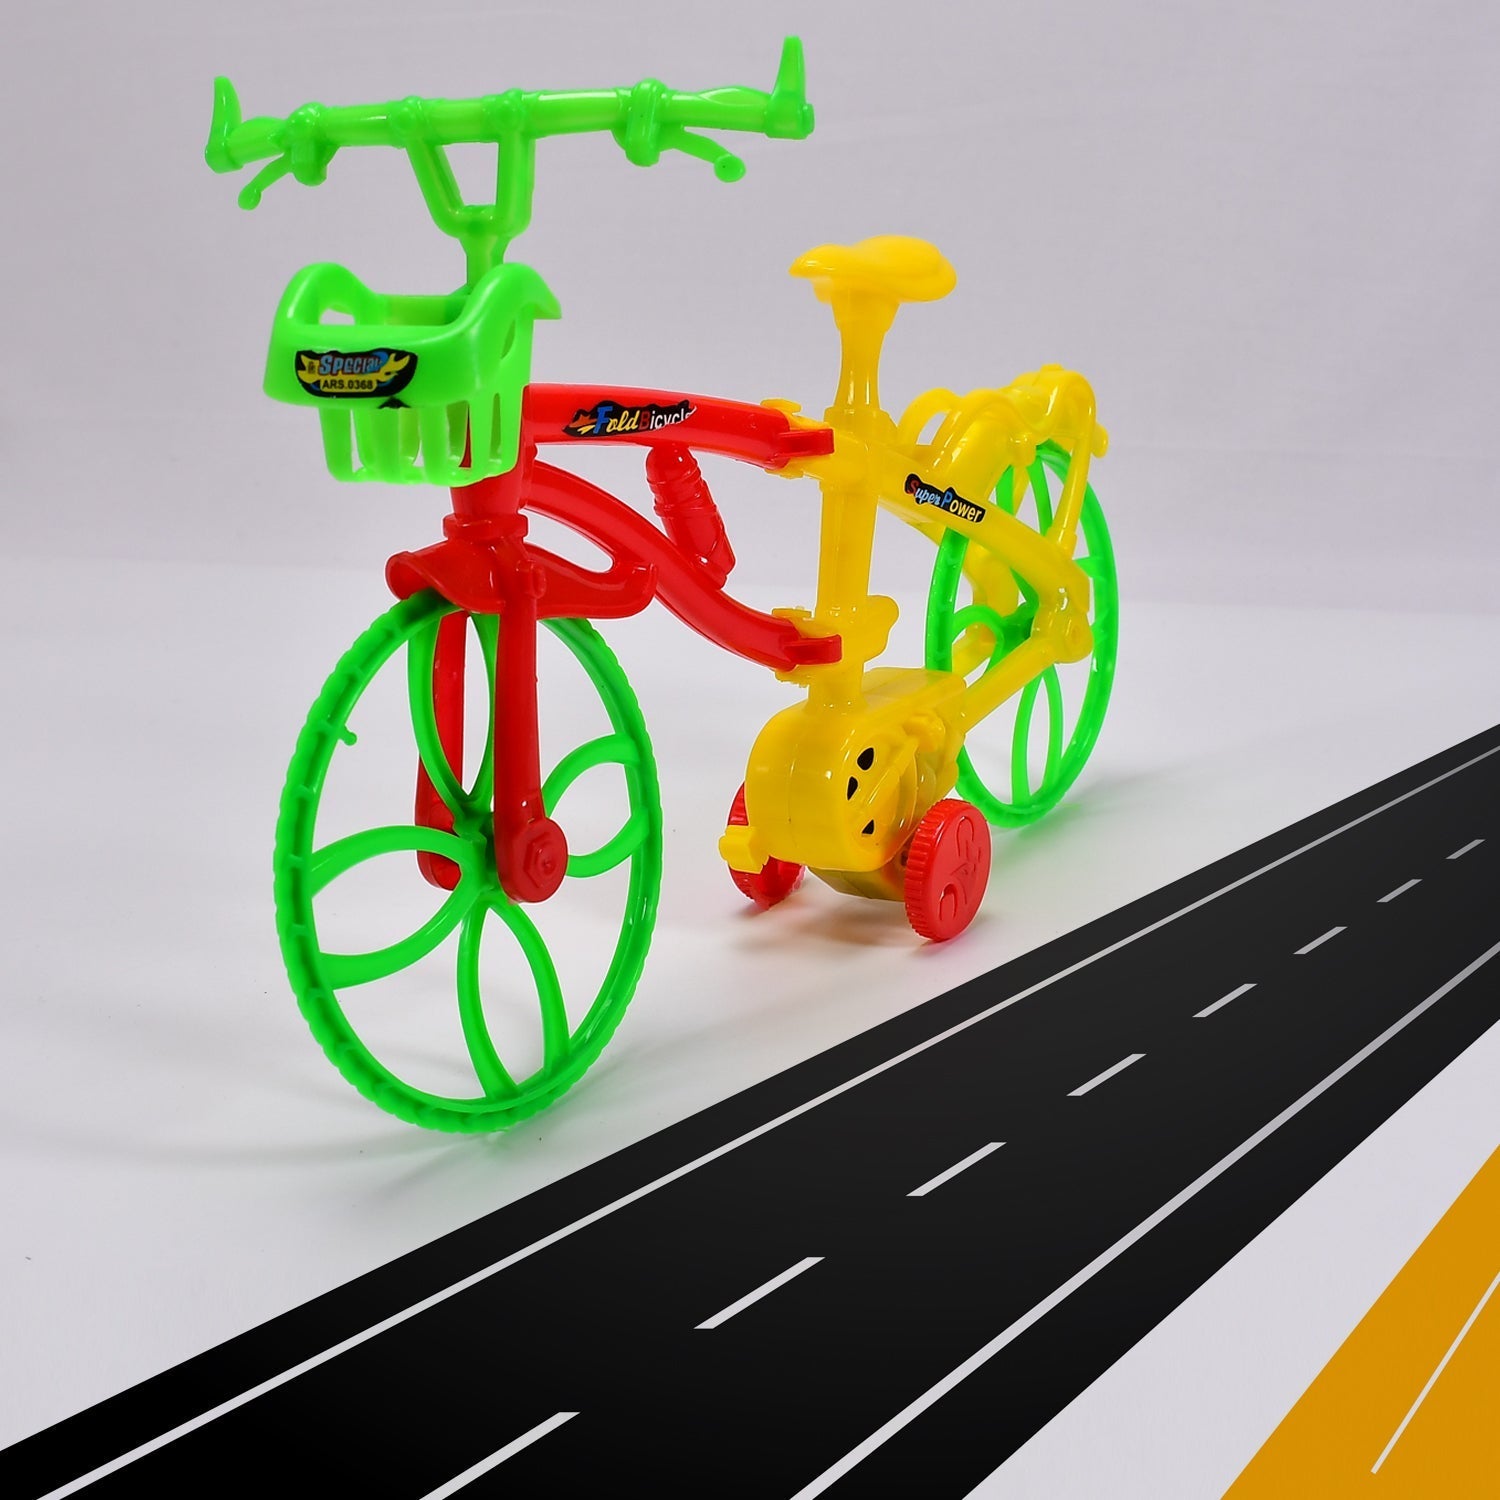 4457 Plastic Foldable Kids Bicycle Toy DeoDap